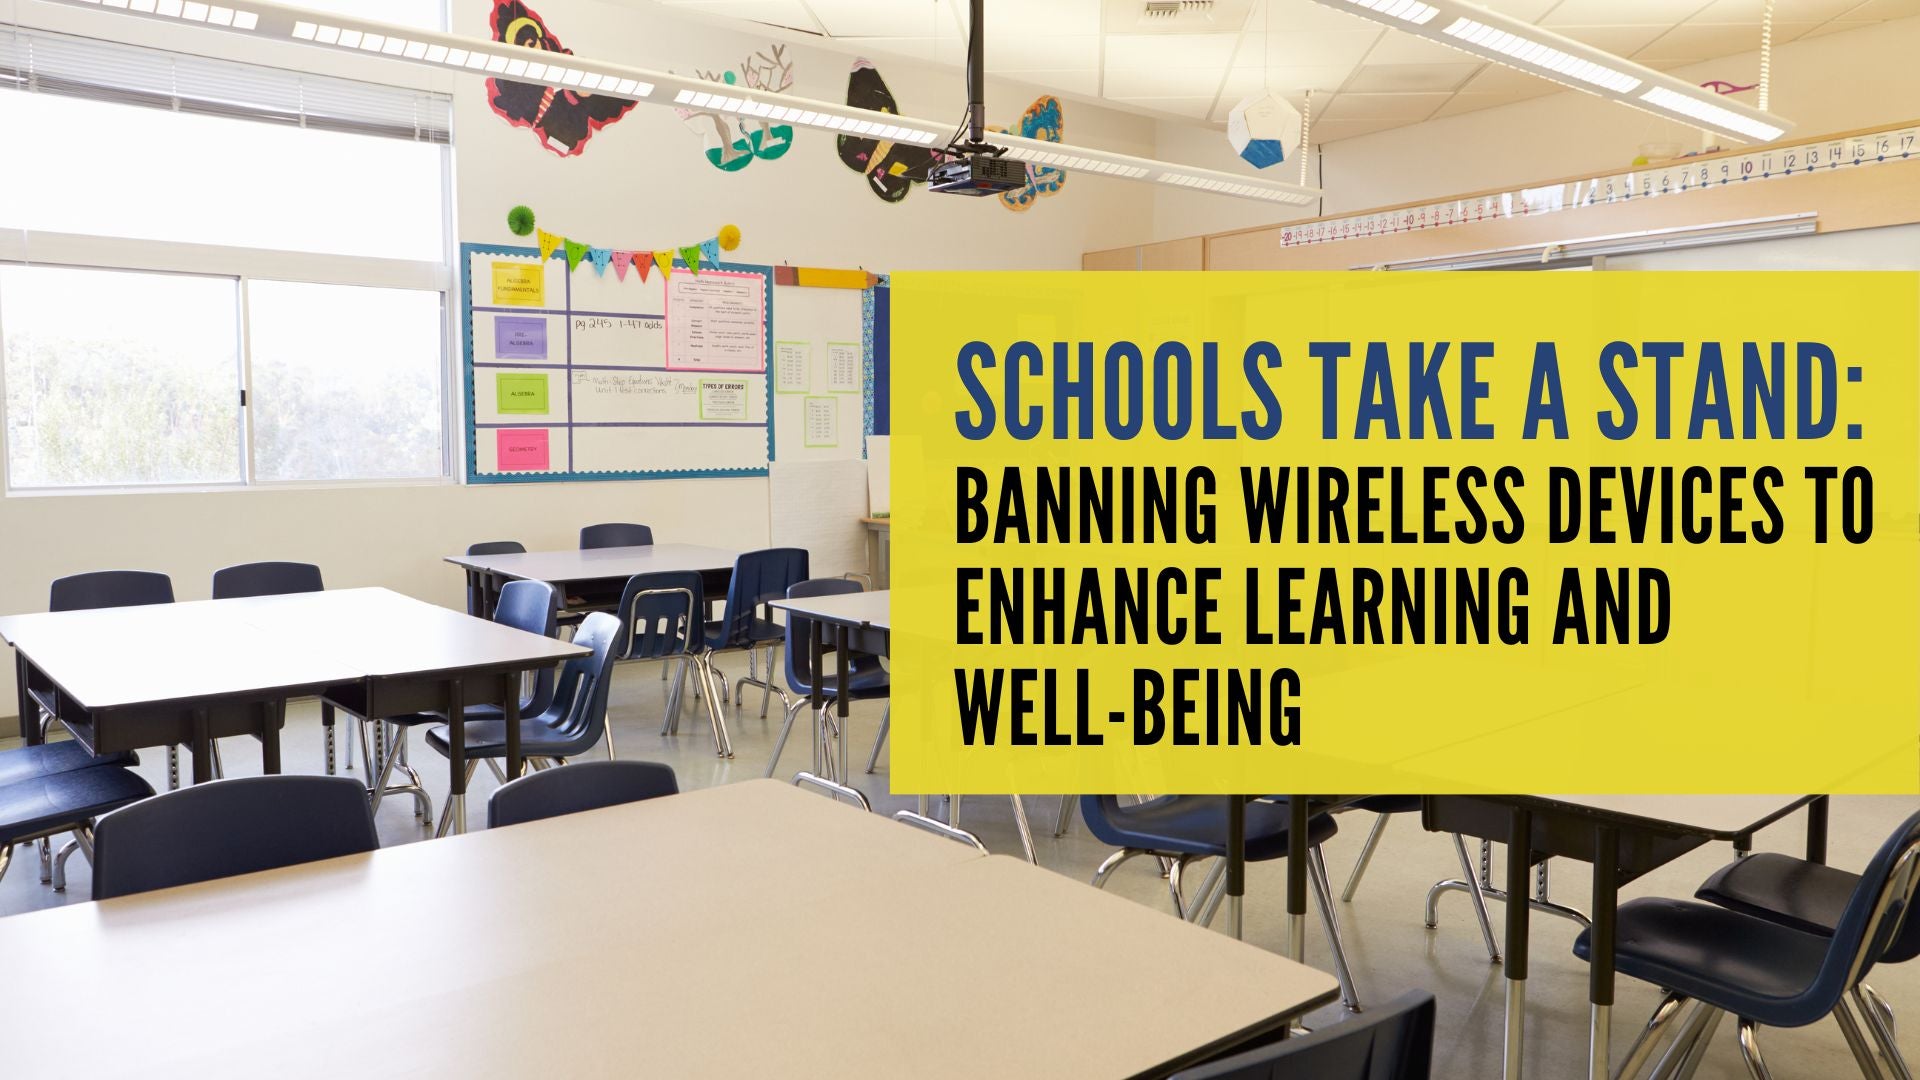 Schools Take a Stand: Banning Wireless Devices to Enhance Learning and Well-Being